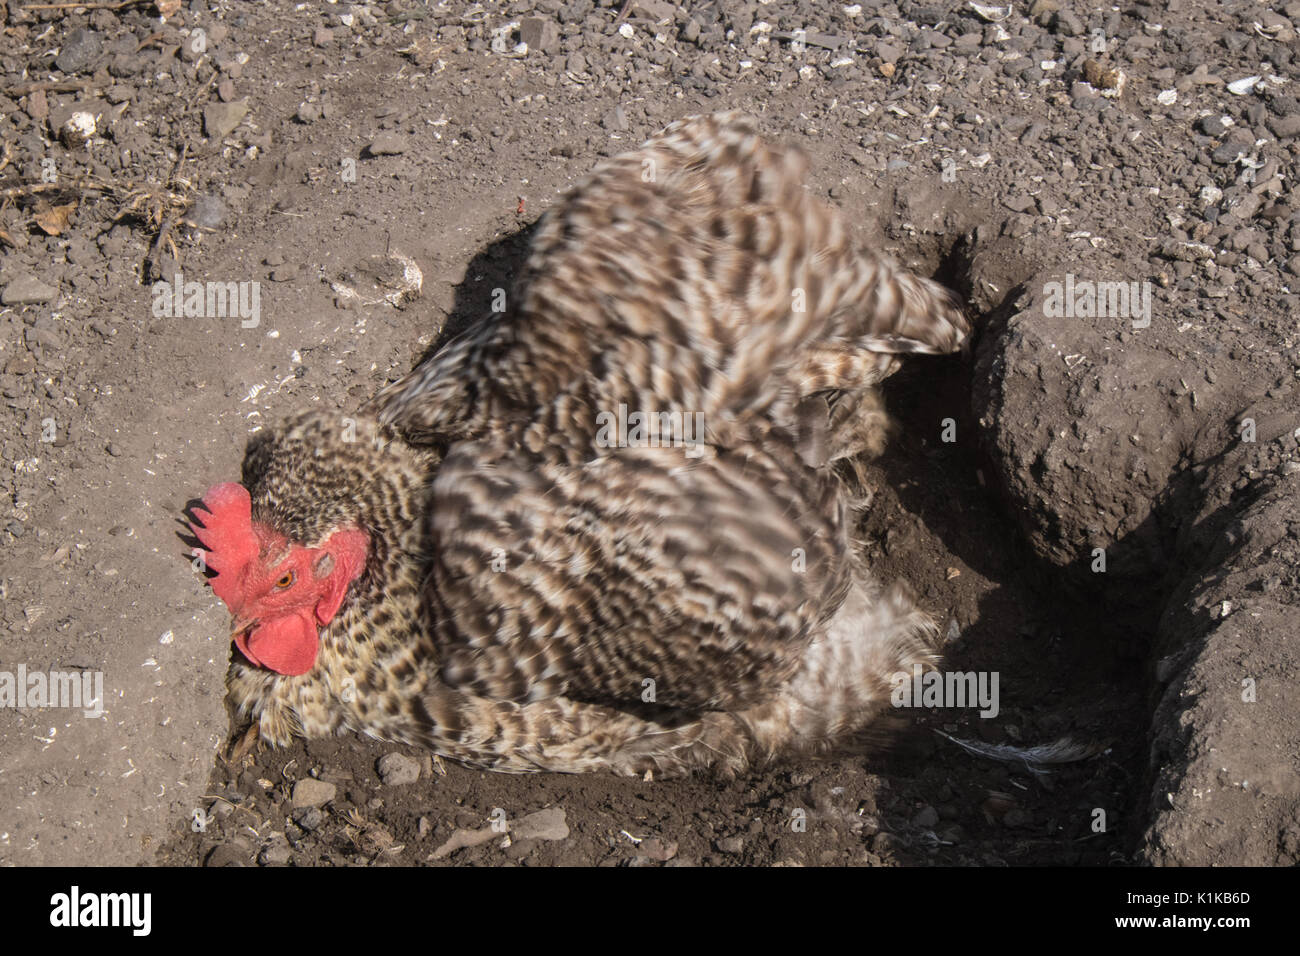 Small,number,of,my,backyard,chickens,in,my,MODEL RELEASED,PROPERTY RELEASED garden, in Wales,village,Welsh,U.K.,UK,Europe, Stock Photo